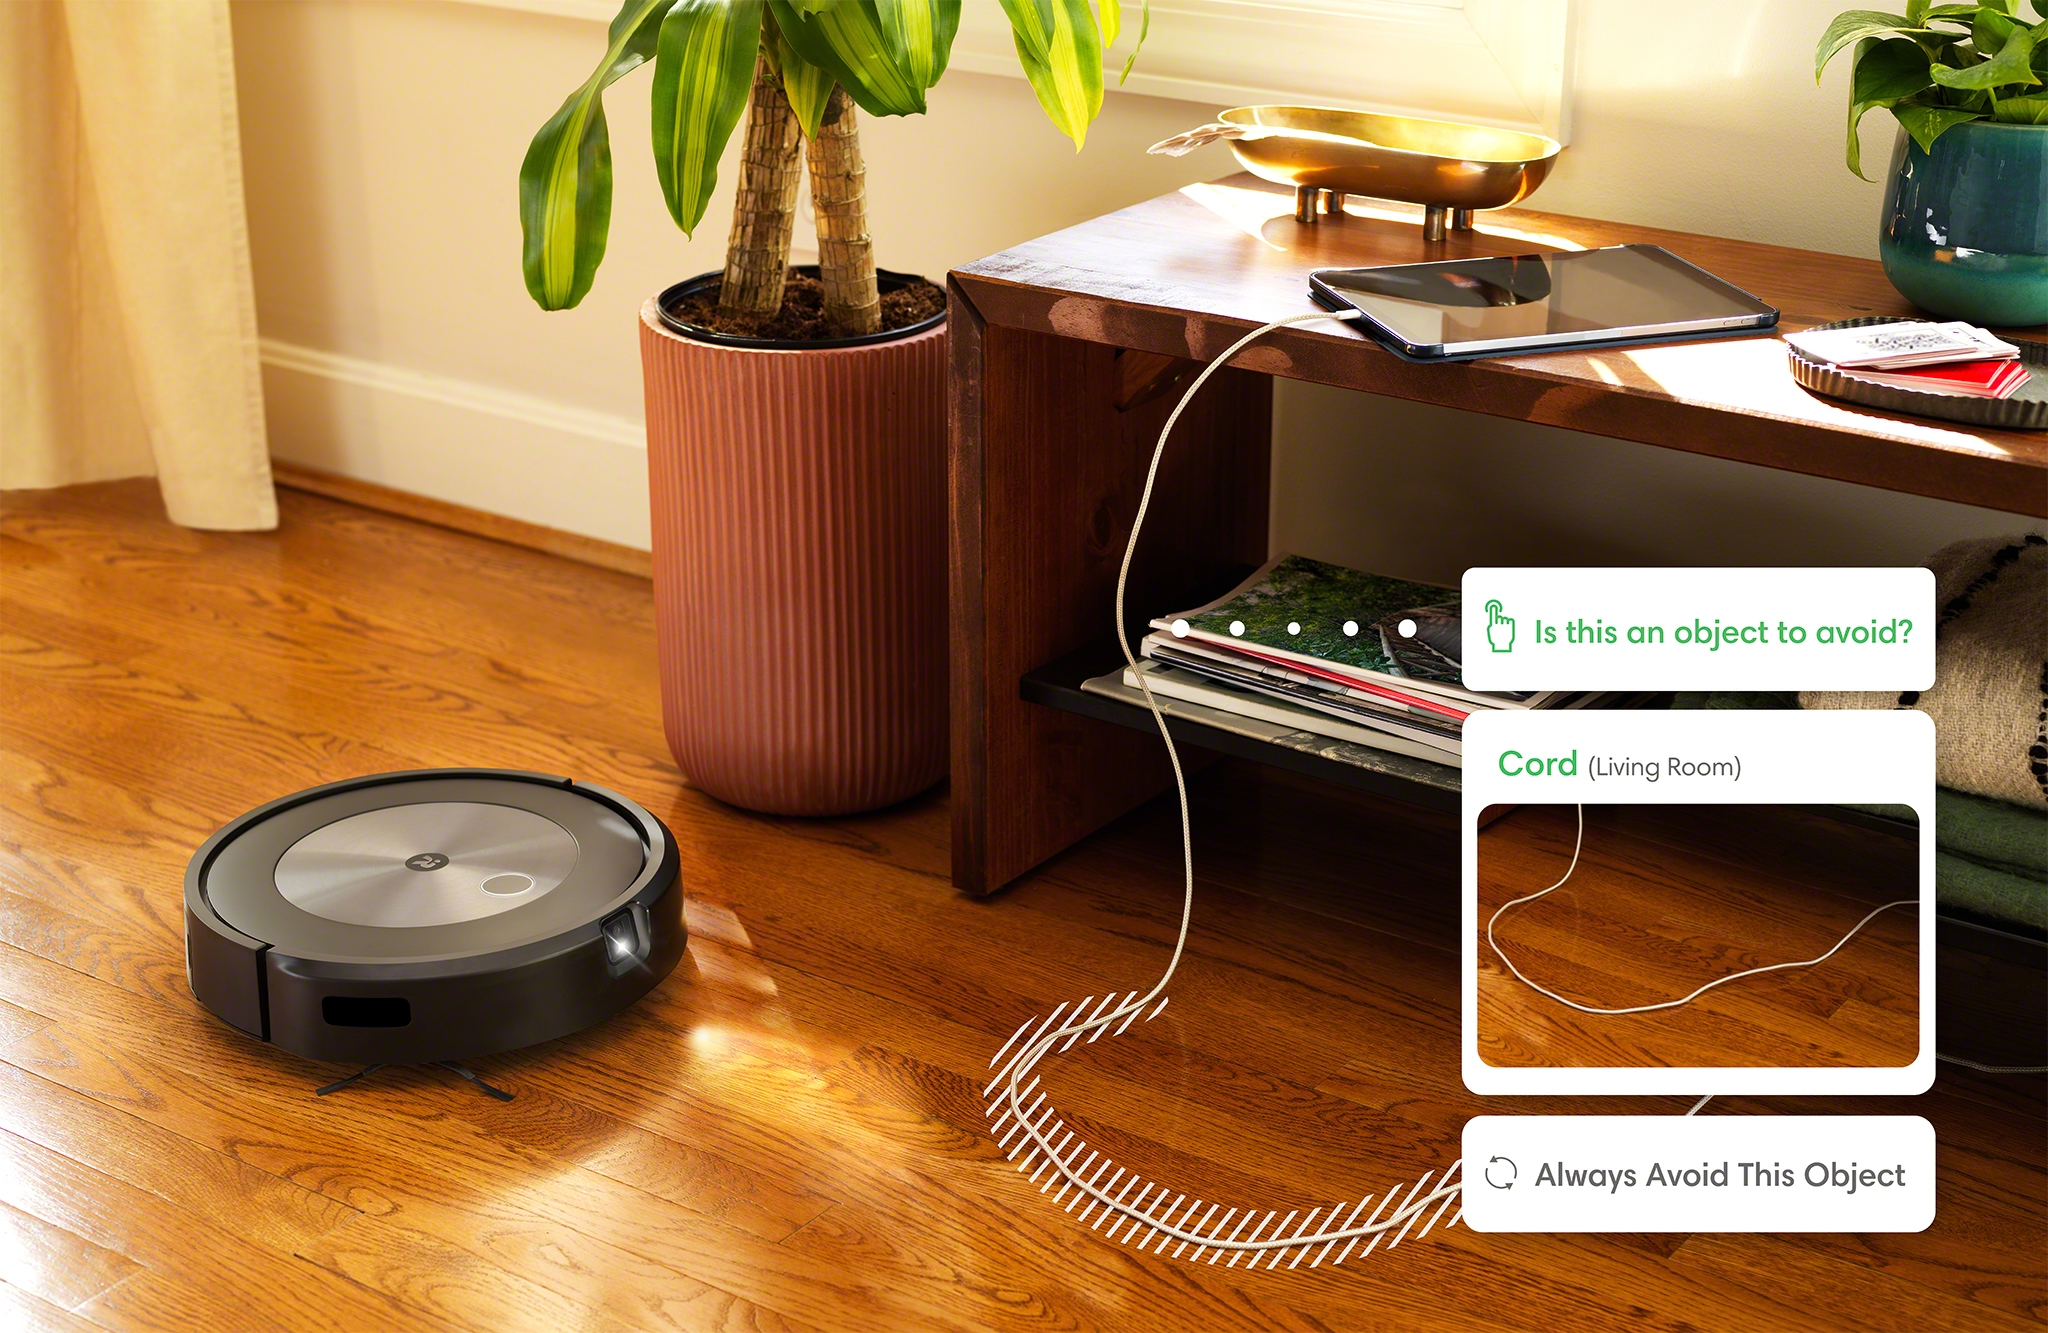 The iRobot Roomba j7+ reacts to objects in the home with PrecisionVision Navigation, giving the robot the ability to identify and avoid common obstacles, such as cords.